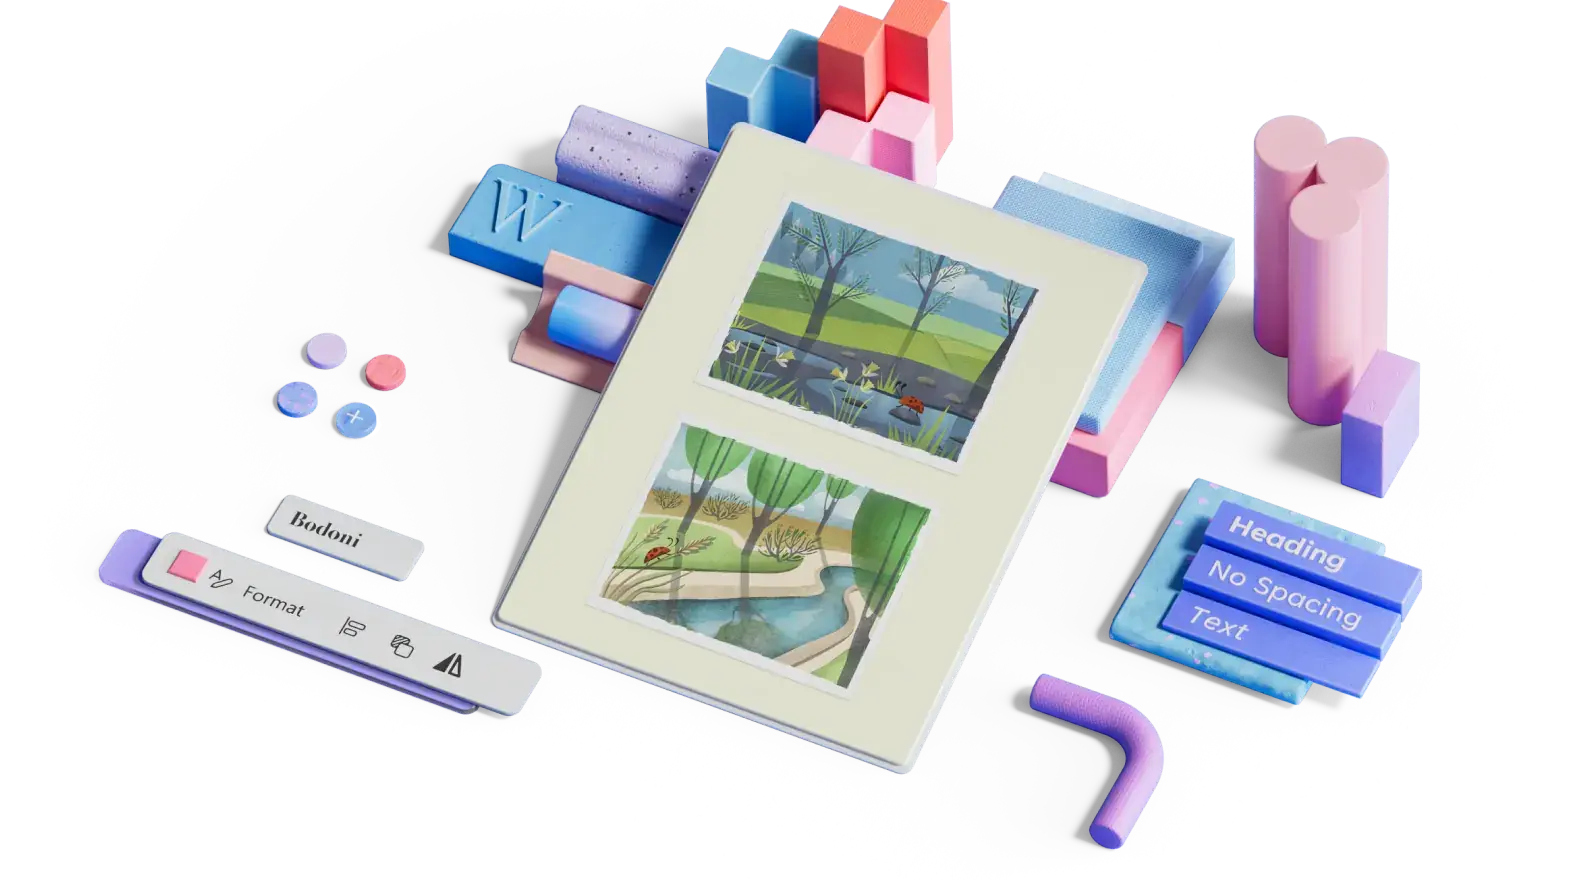 A nature-themed postcard surrounded by decorative 3D elements